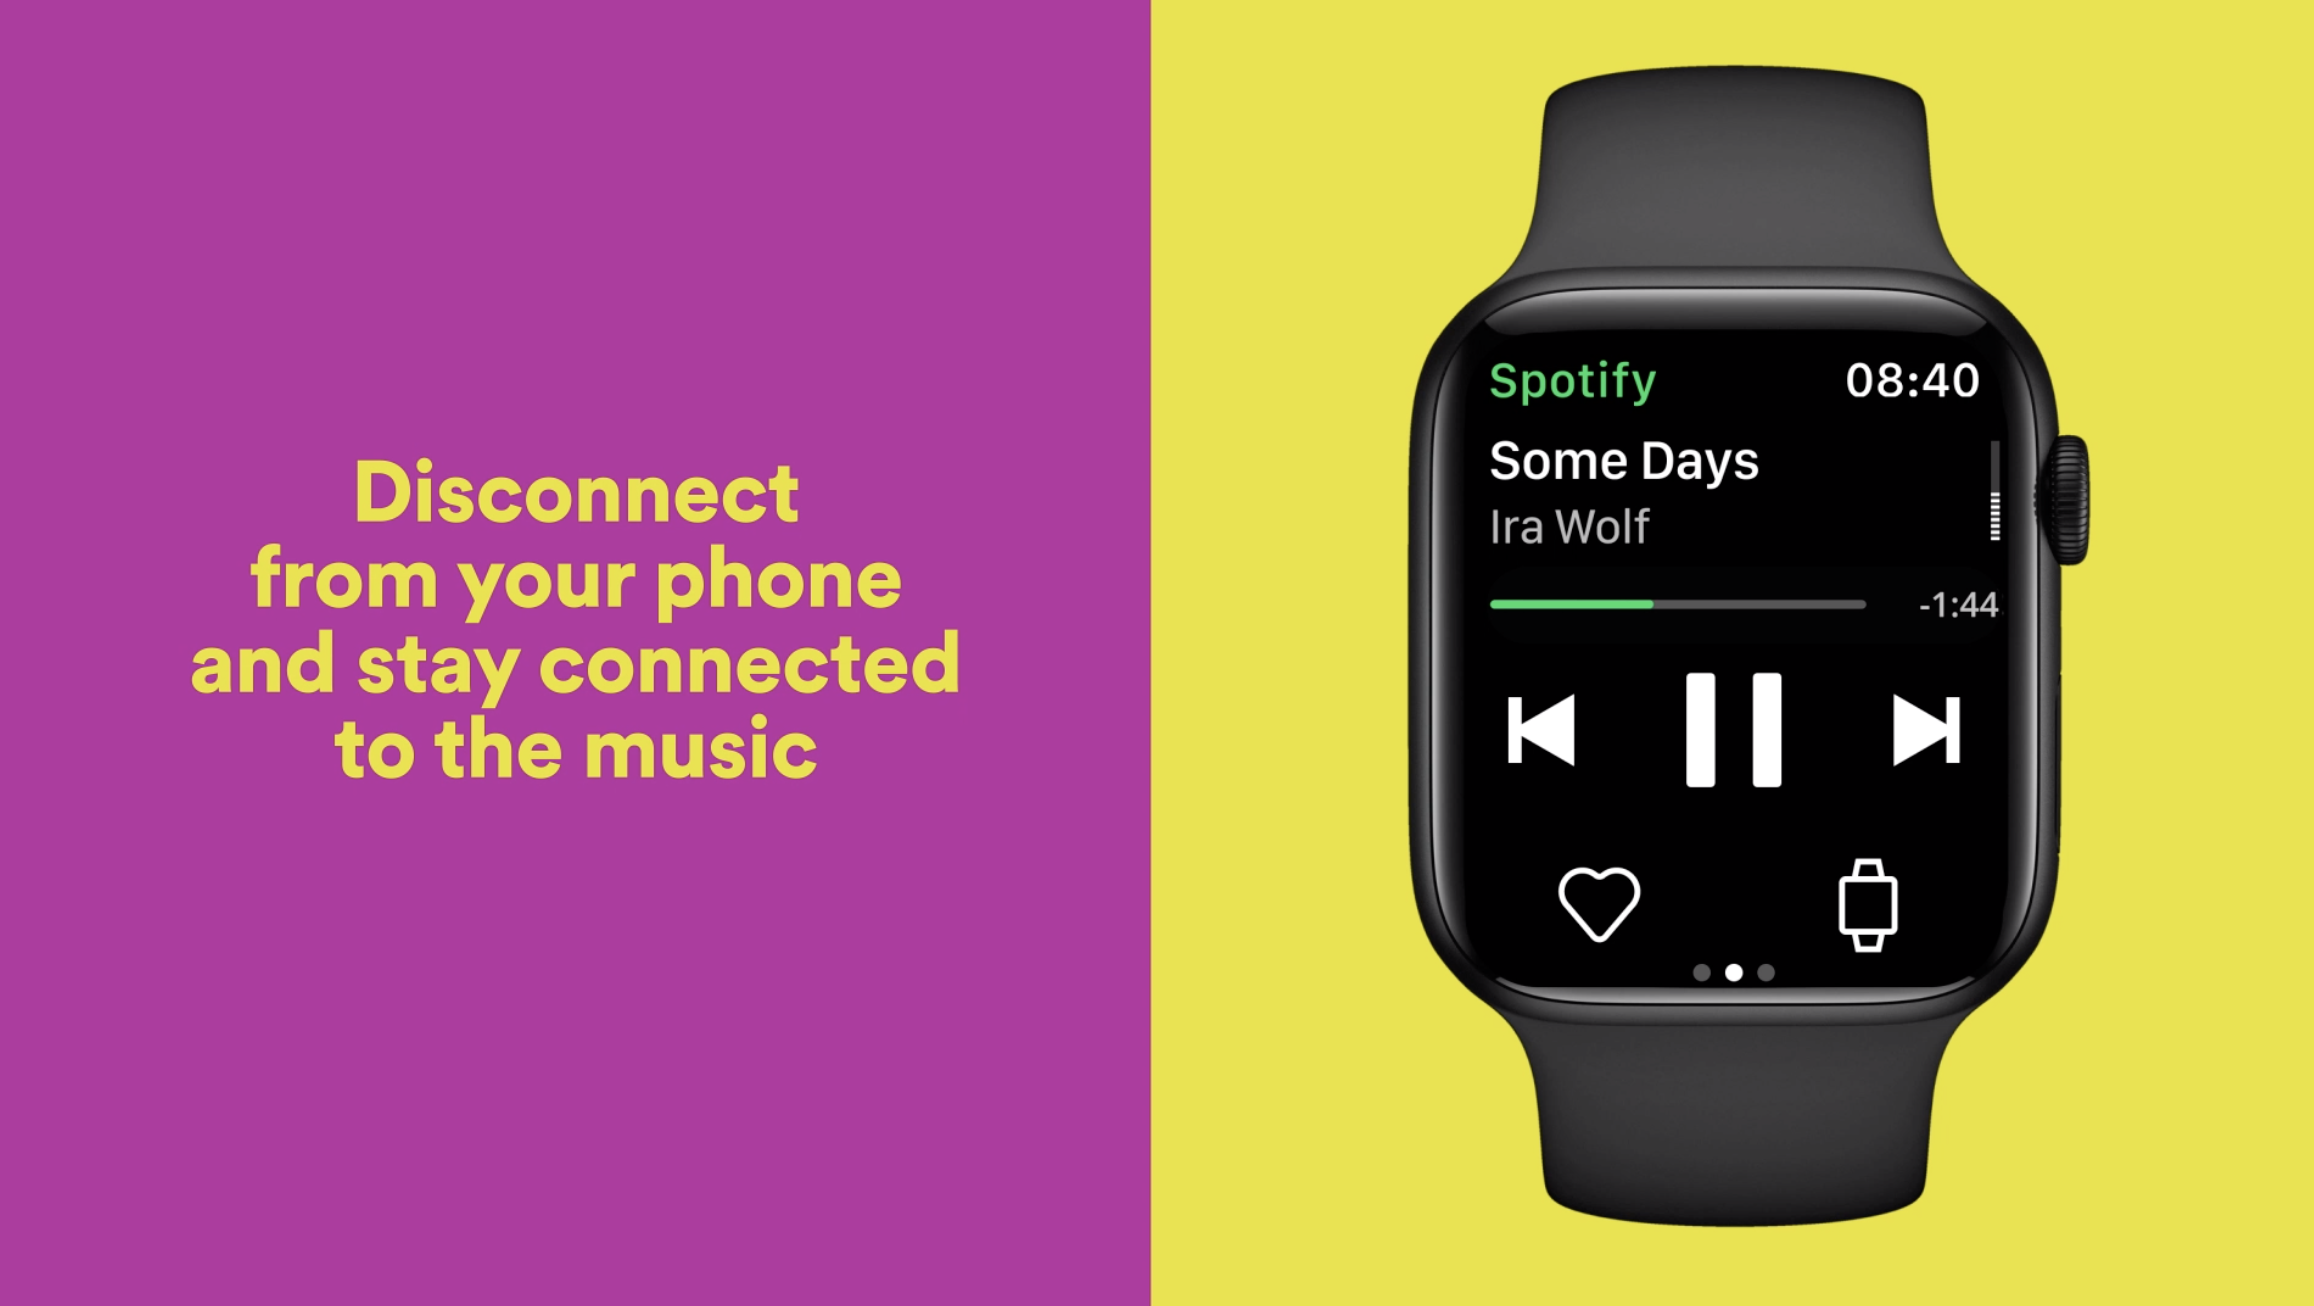 How to Use Spotify on an Apple Watch